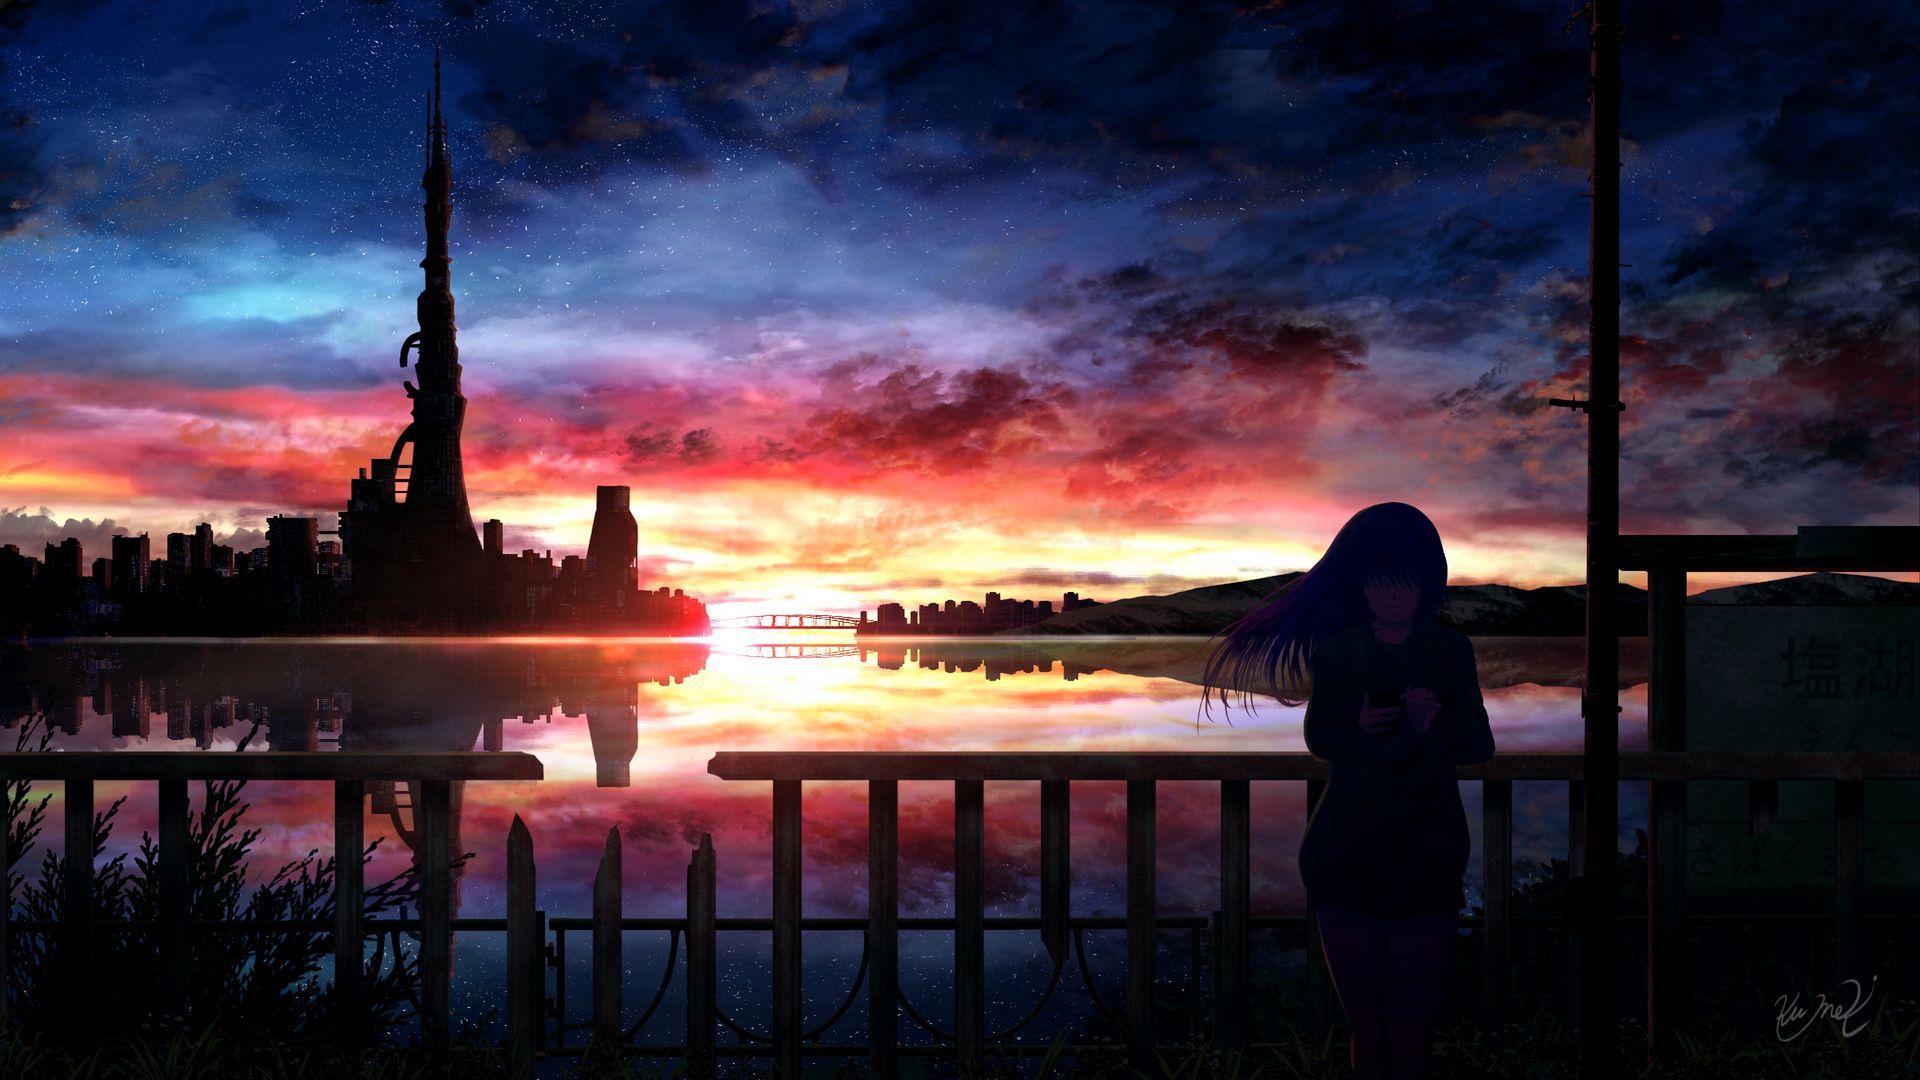 Download wallpaper 1920x1080 silhouette, night, starry sky, girl, anime full hd, hdtv, fhd, 1080p HD background